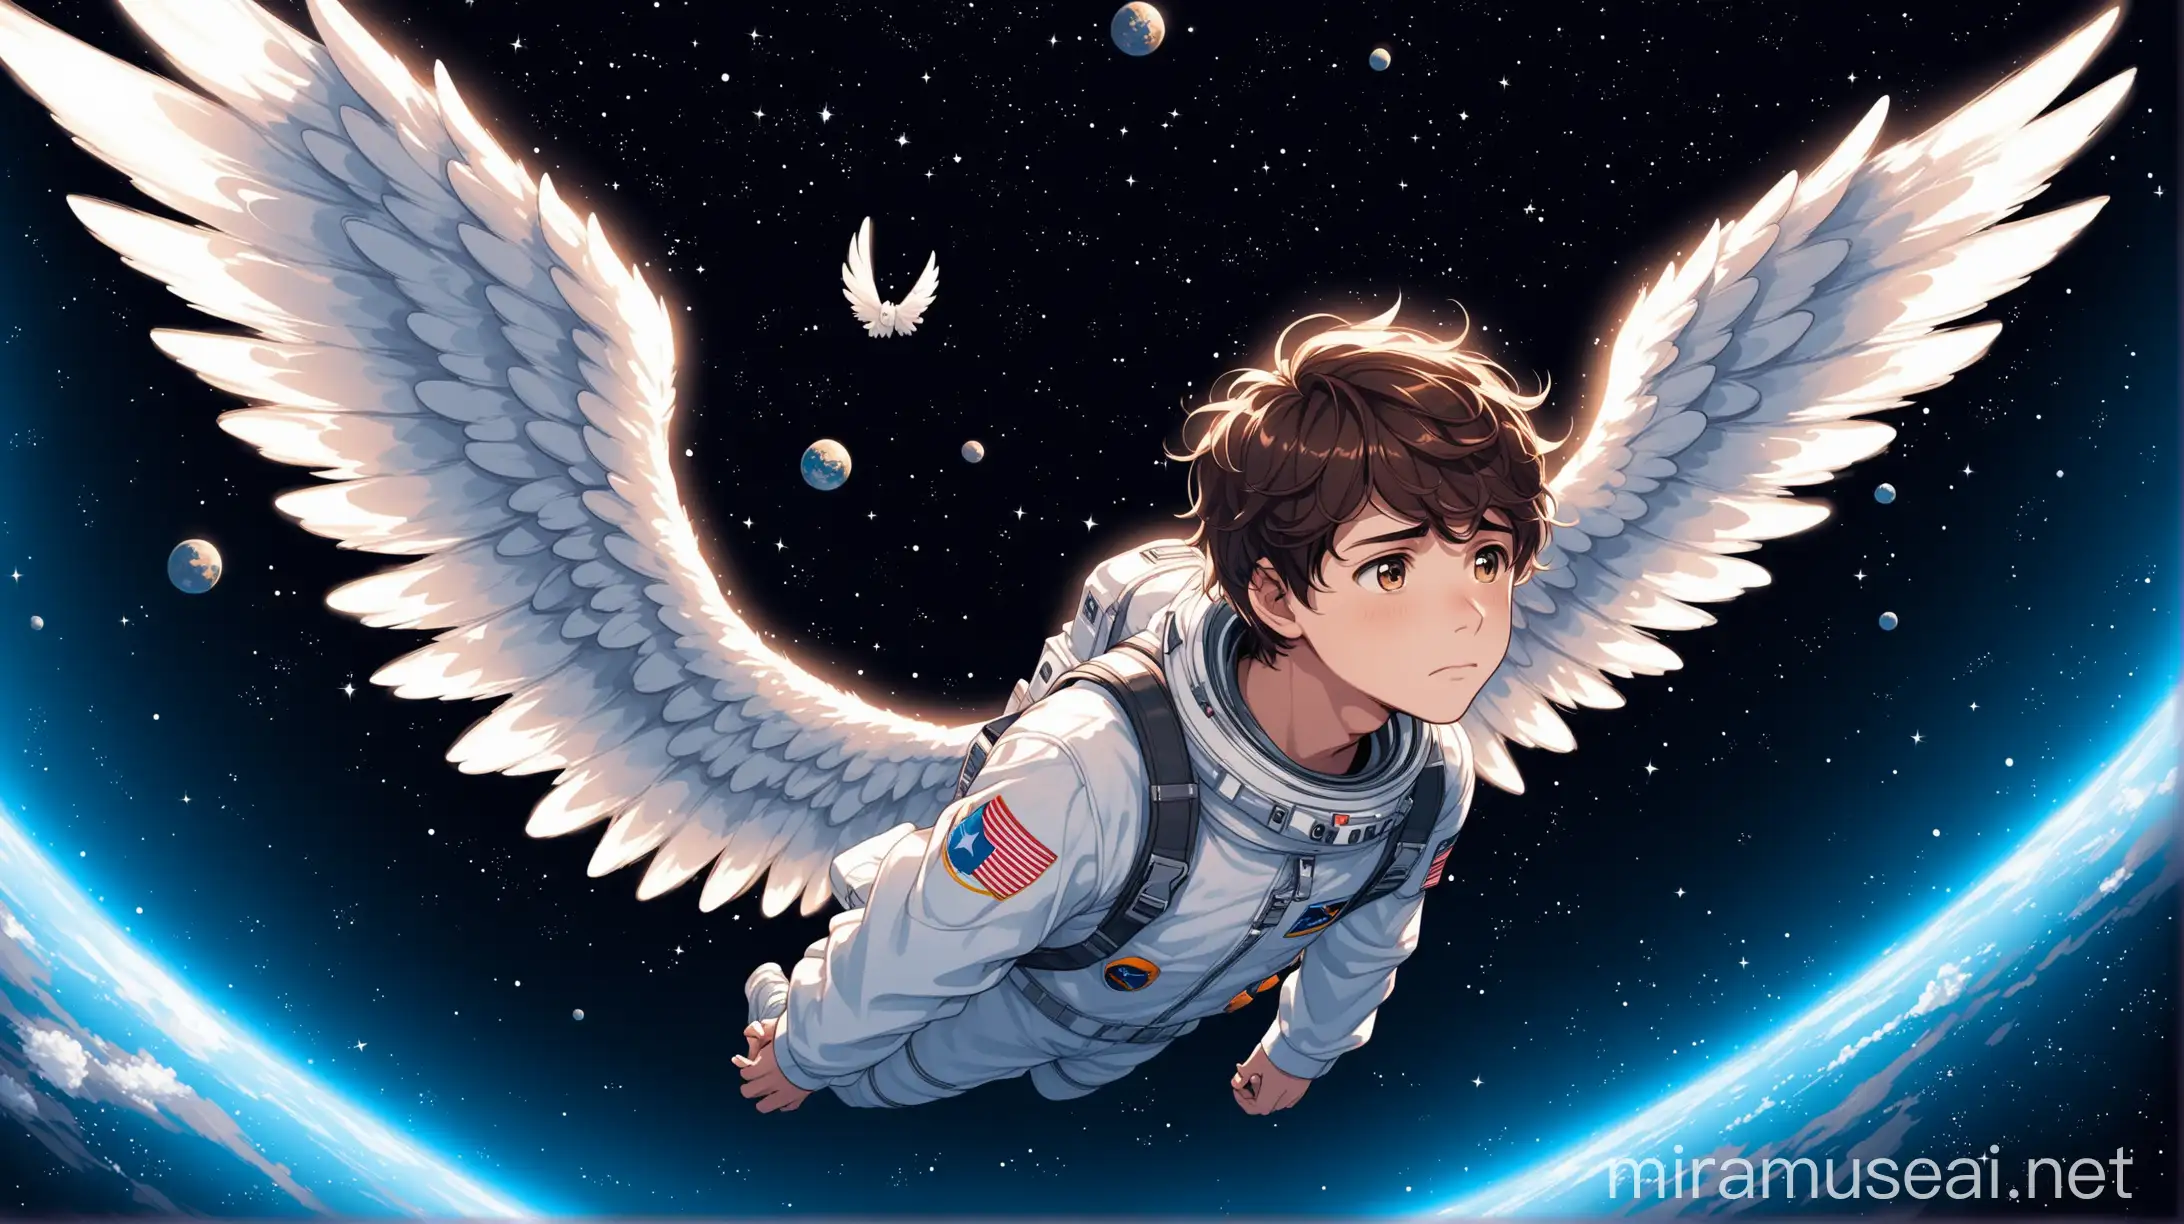 Lonely Teenage Angel Falling in the Vast Expanse of Space